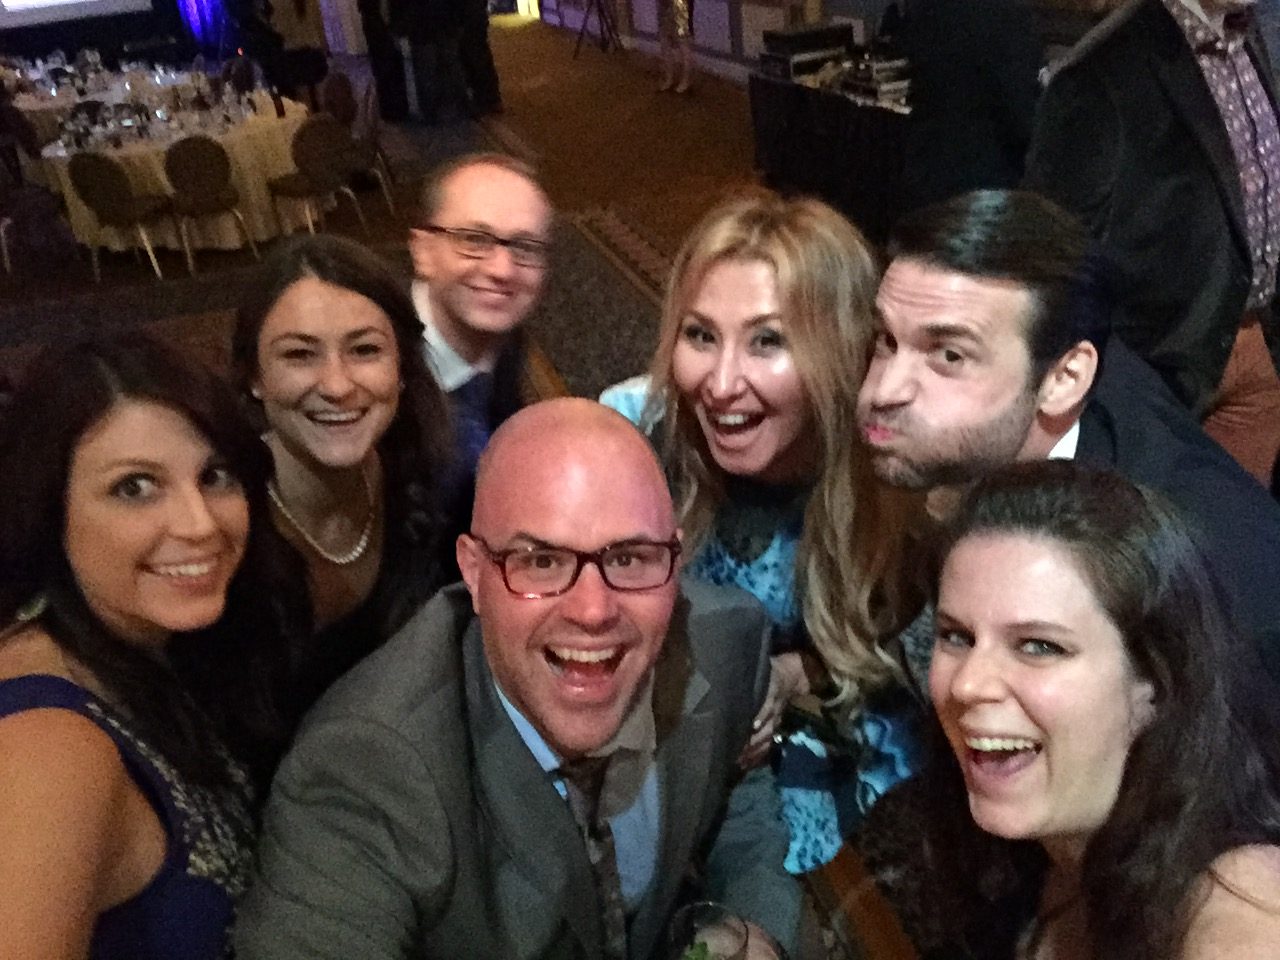 US Search awards selfie